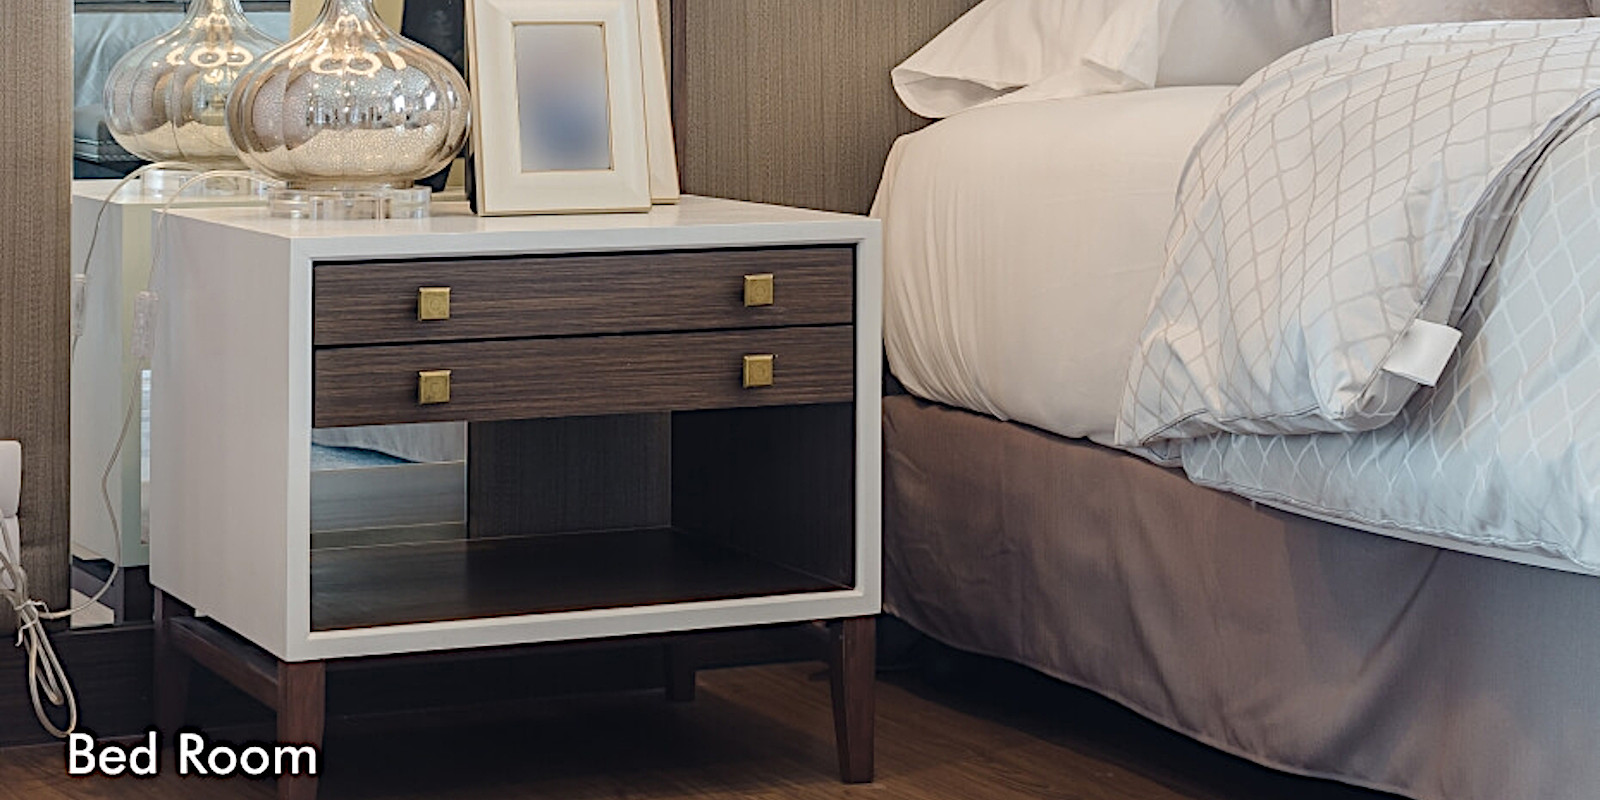 Bedroom furniture at a discount